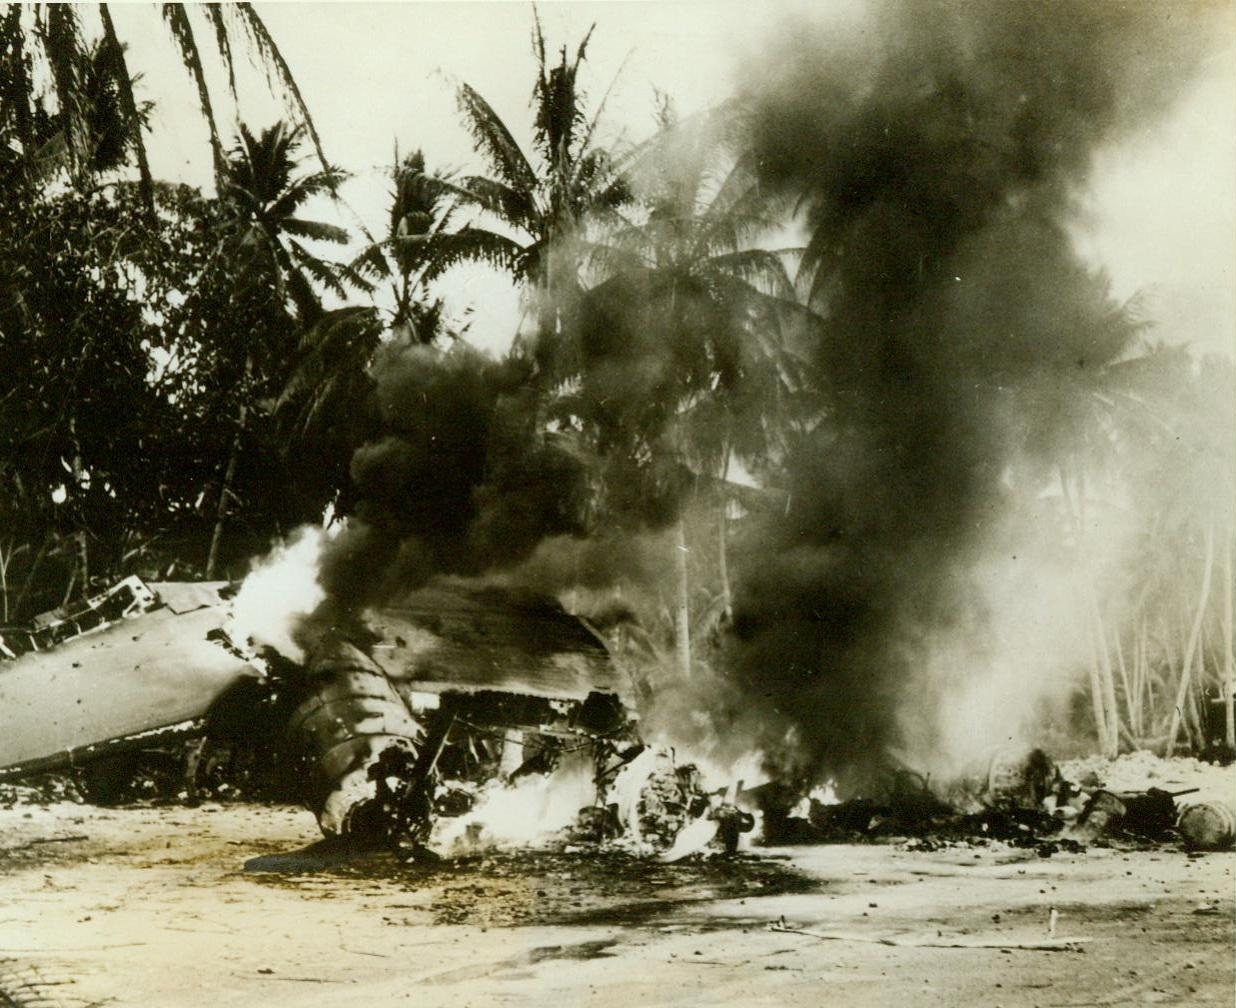 One-Half the Score. FUNAFUTI ISLAND, PACIFIC - This blazing B-24...is only one half of the score of damaged U.S. planes chalked up by the Japan...when they raided Funafuti Island the day...American Army bombers smashed at Nauru. Few casualties and the two bombers was...only damage done by the Nips when they...to smash timy Funafuti, the take-off...in the Ellice Islands for our...raid the previous day.;